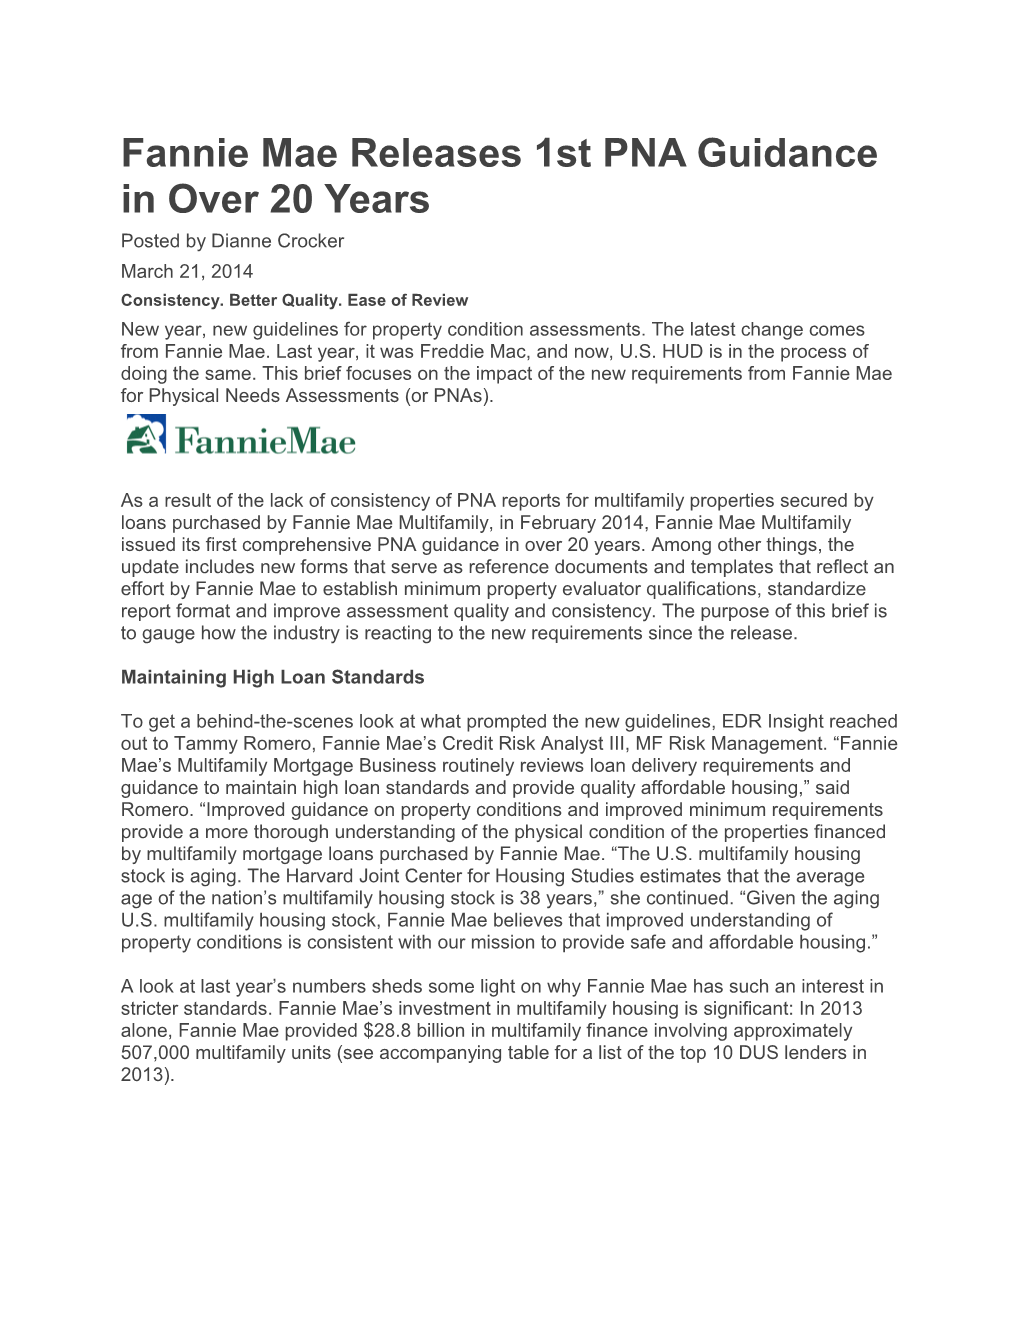 Fannie Mae Releases 1St PNA Guidance in Over 20 Years